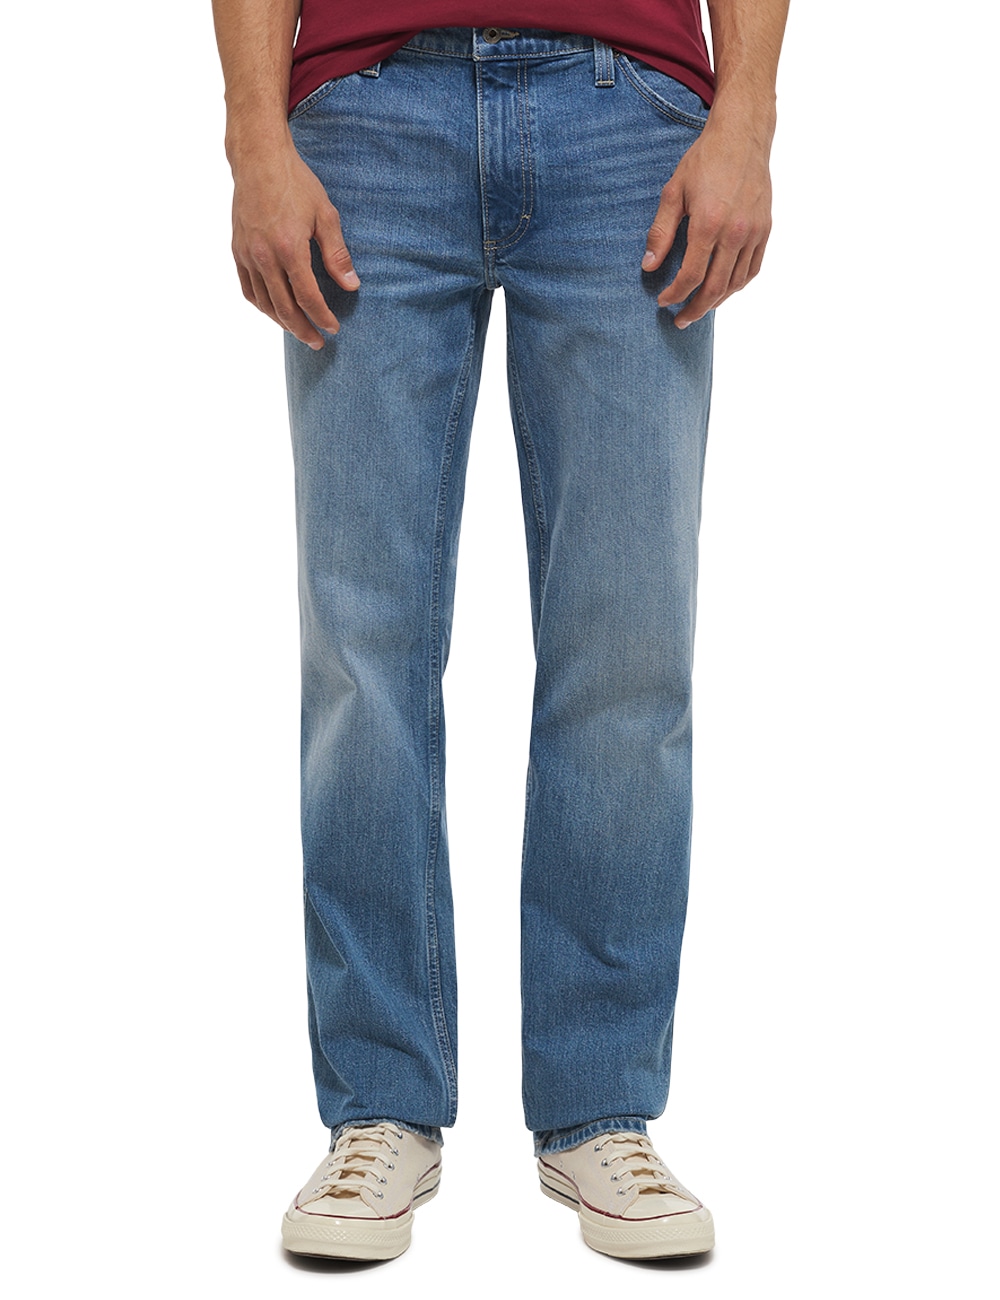 MUSTANG Bequeme Jeans »Style Tramper« von mustang